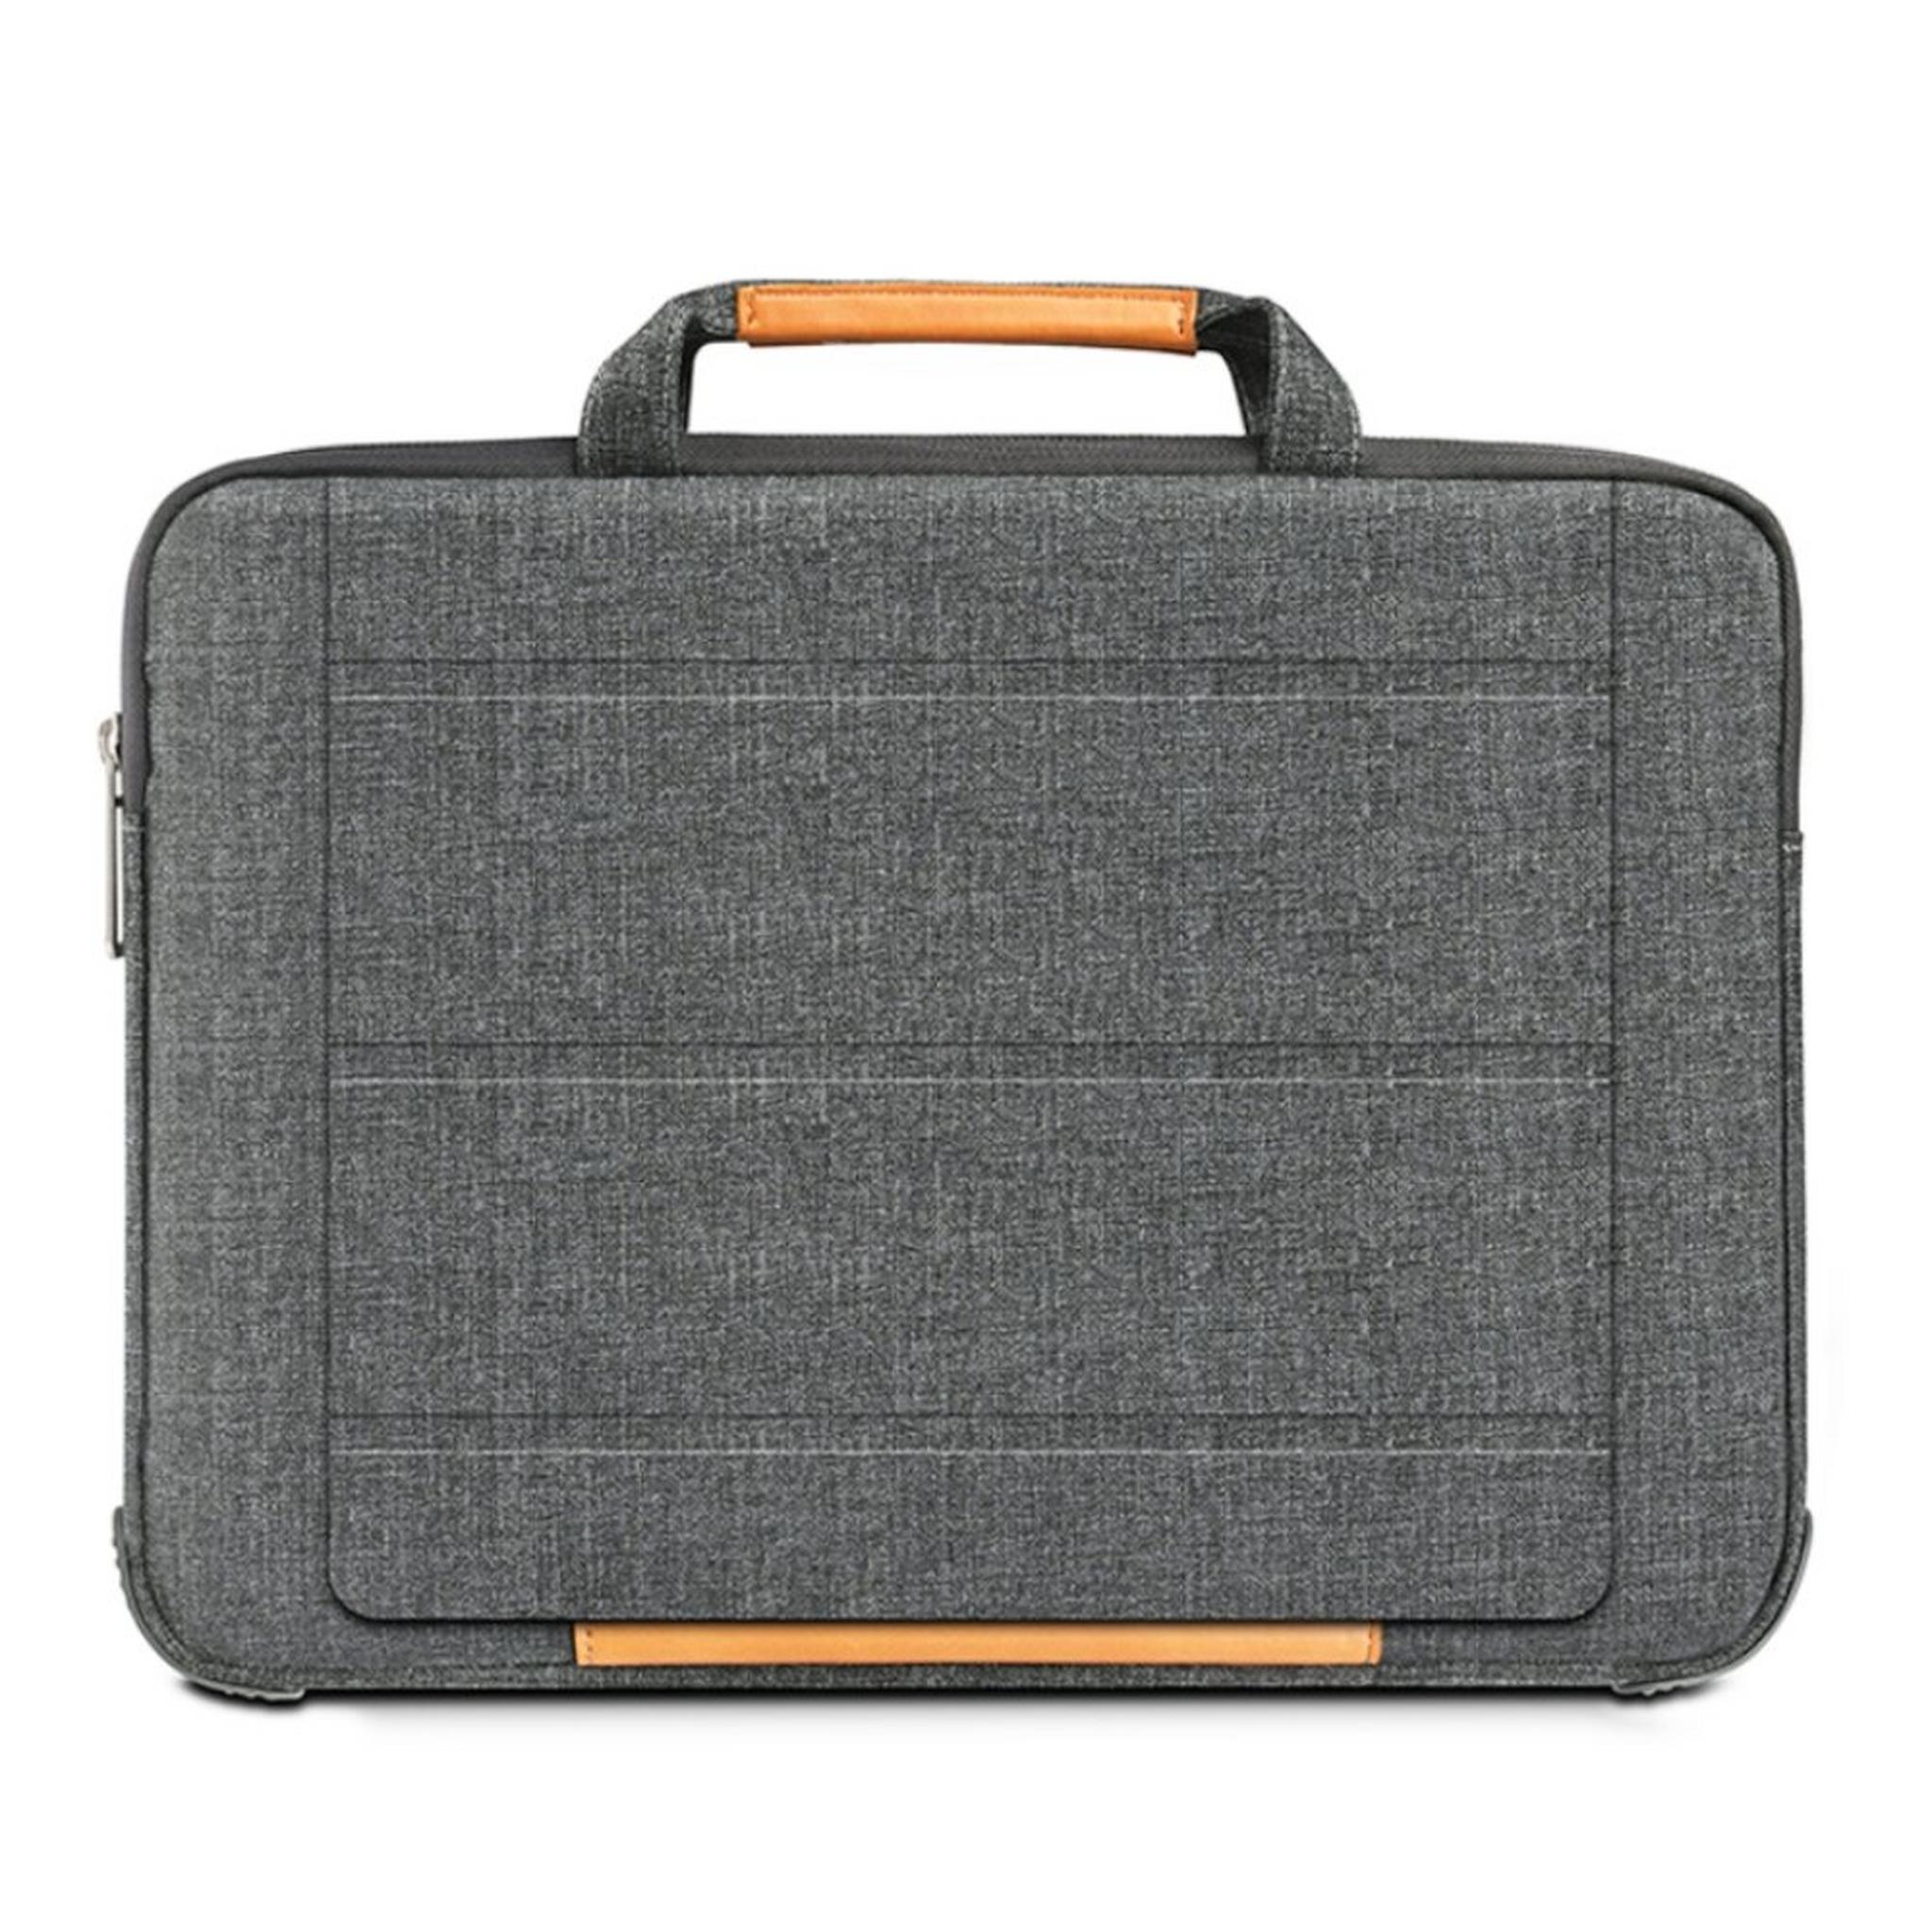 Wiwu Smart Stand 15.4-inch Sleeve For Air MacBook / Laptops - Grey